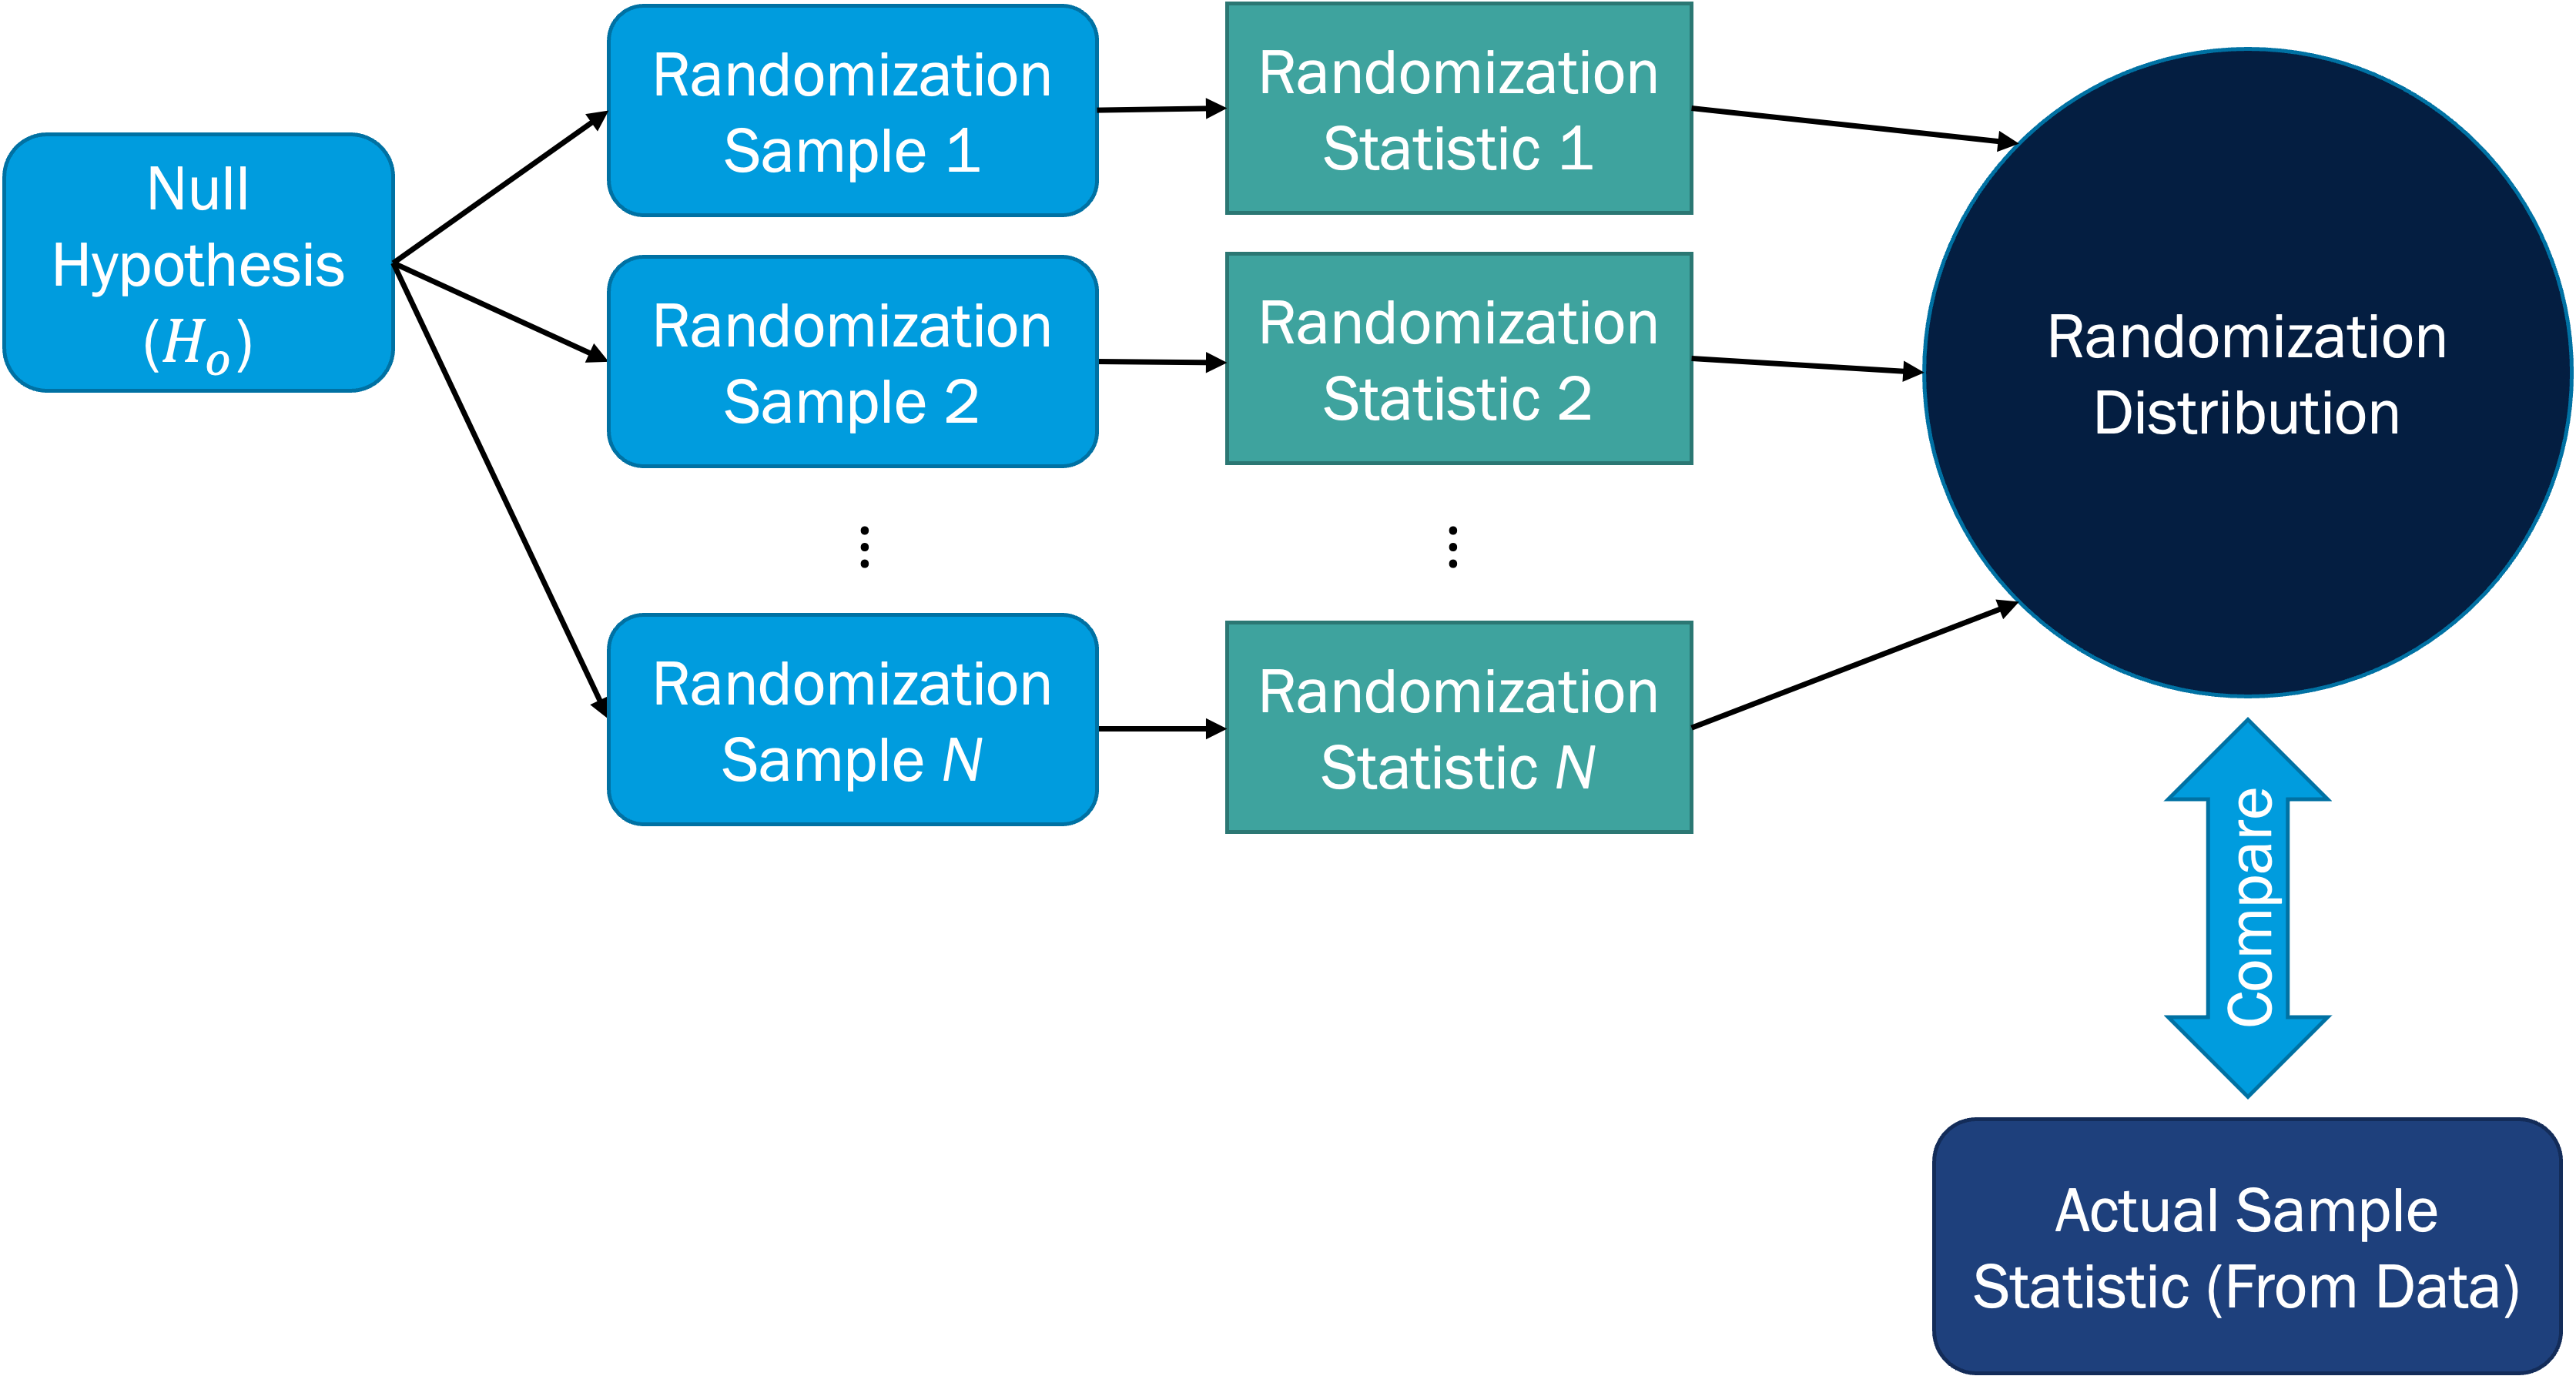 A conceptual flowchart depicting the generation of the randomization distribution from the null hypothesis.